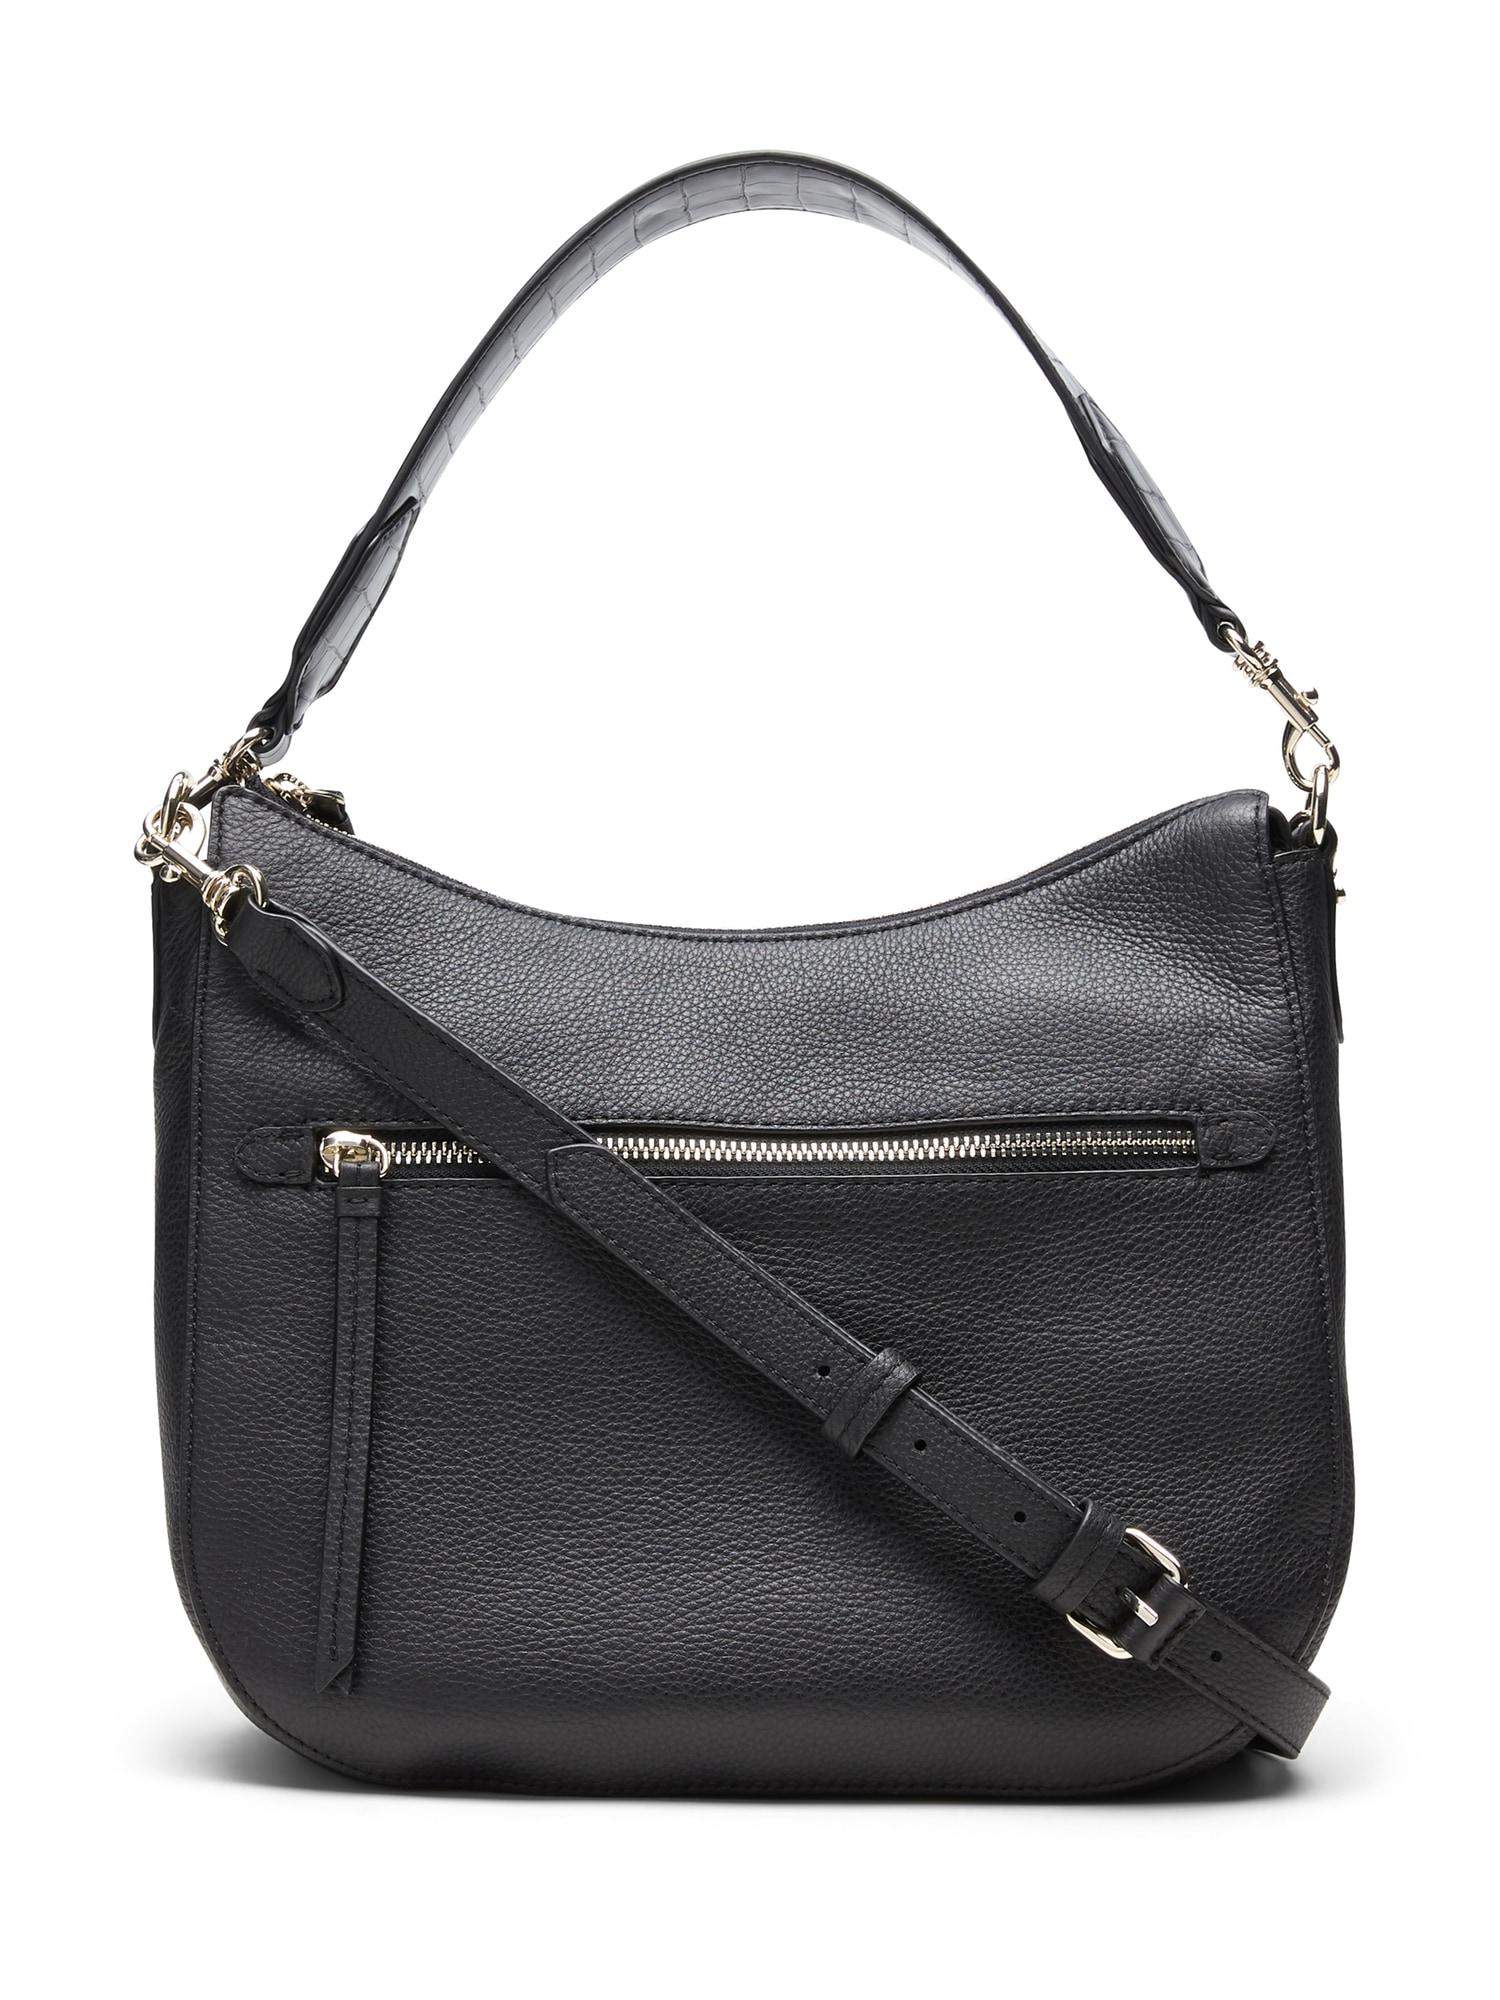 Banana Republic Leather Hobo Bag in Black Leather (Black) - Save 25% - Lyst